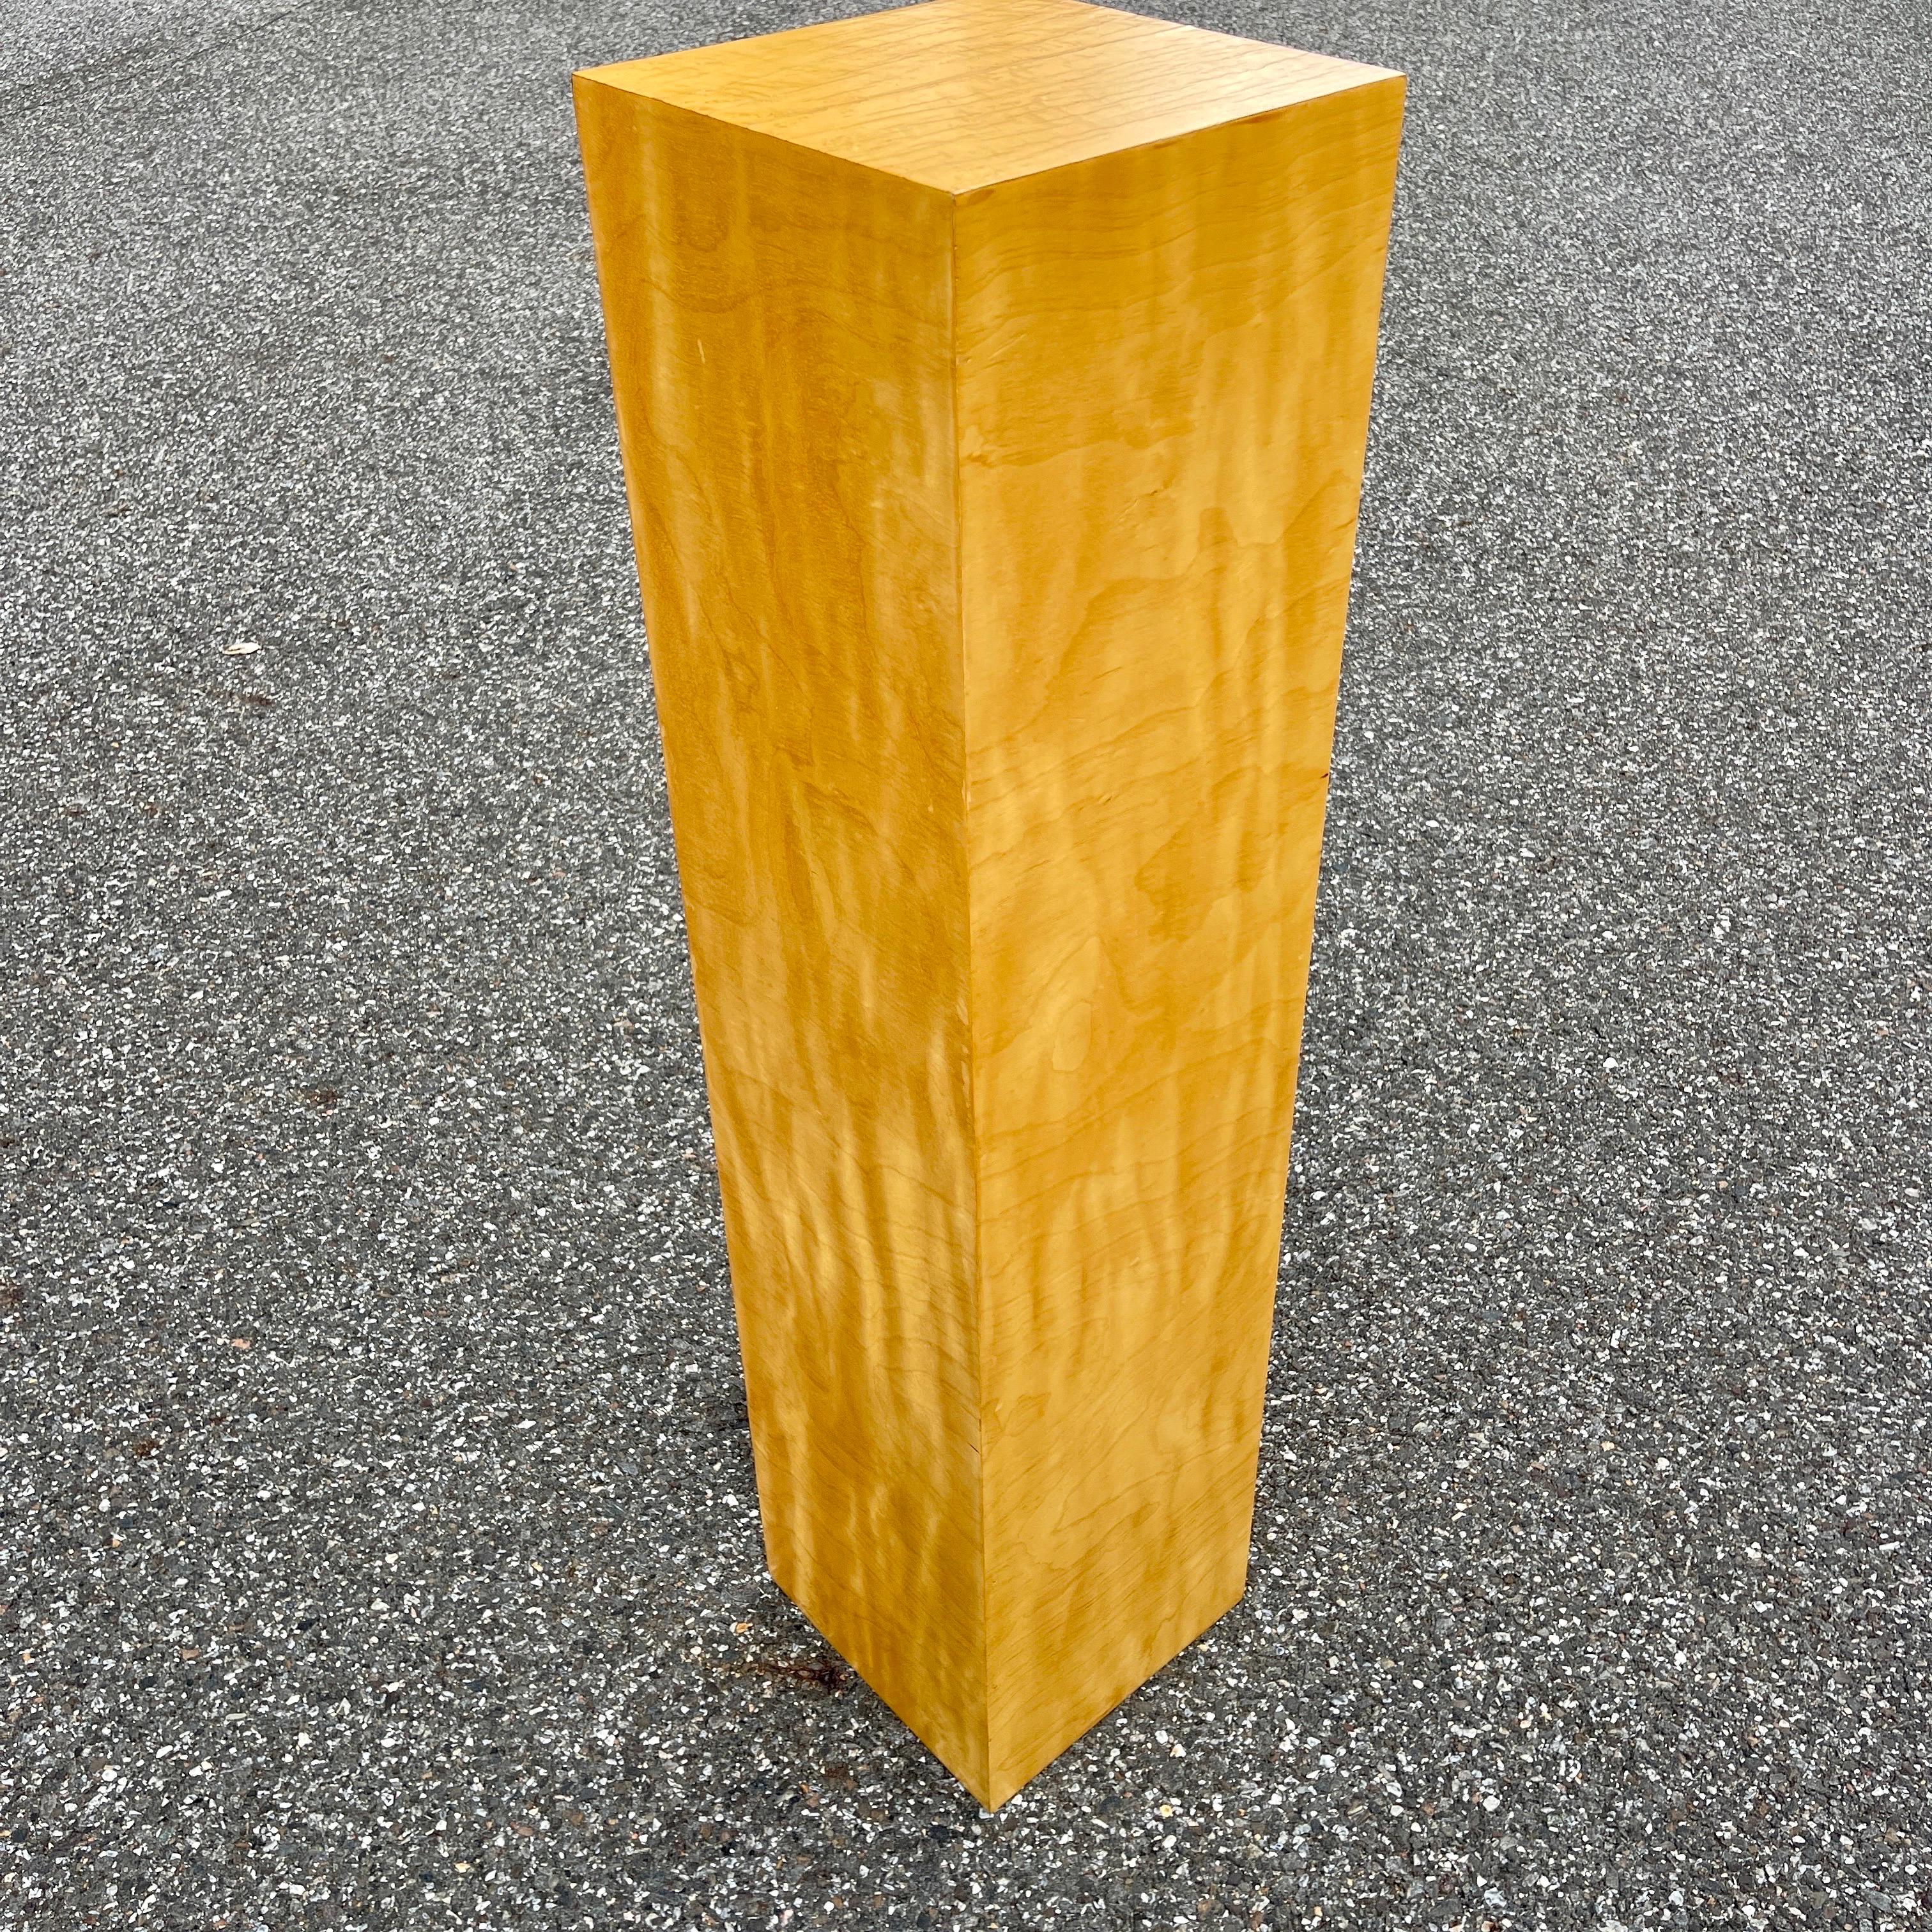 Late 20th Century Light Colored Veneer Wood Pedestal For Sale 3